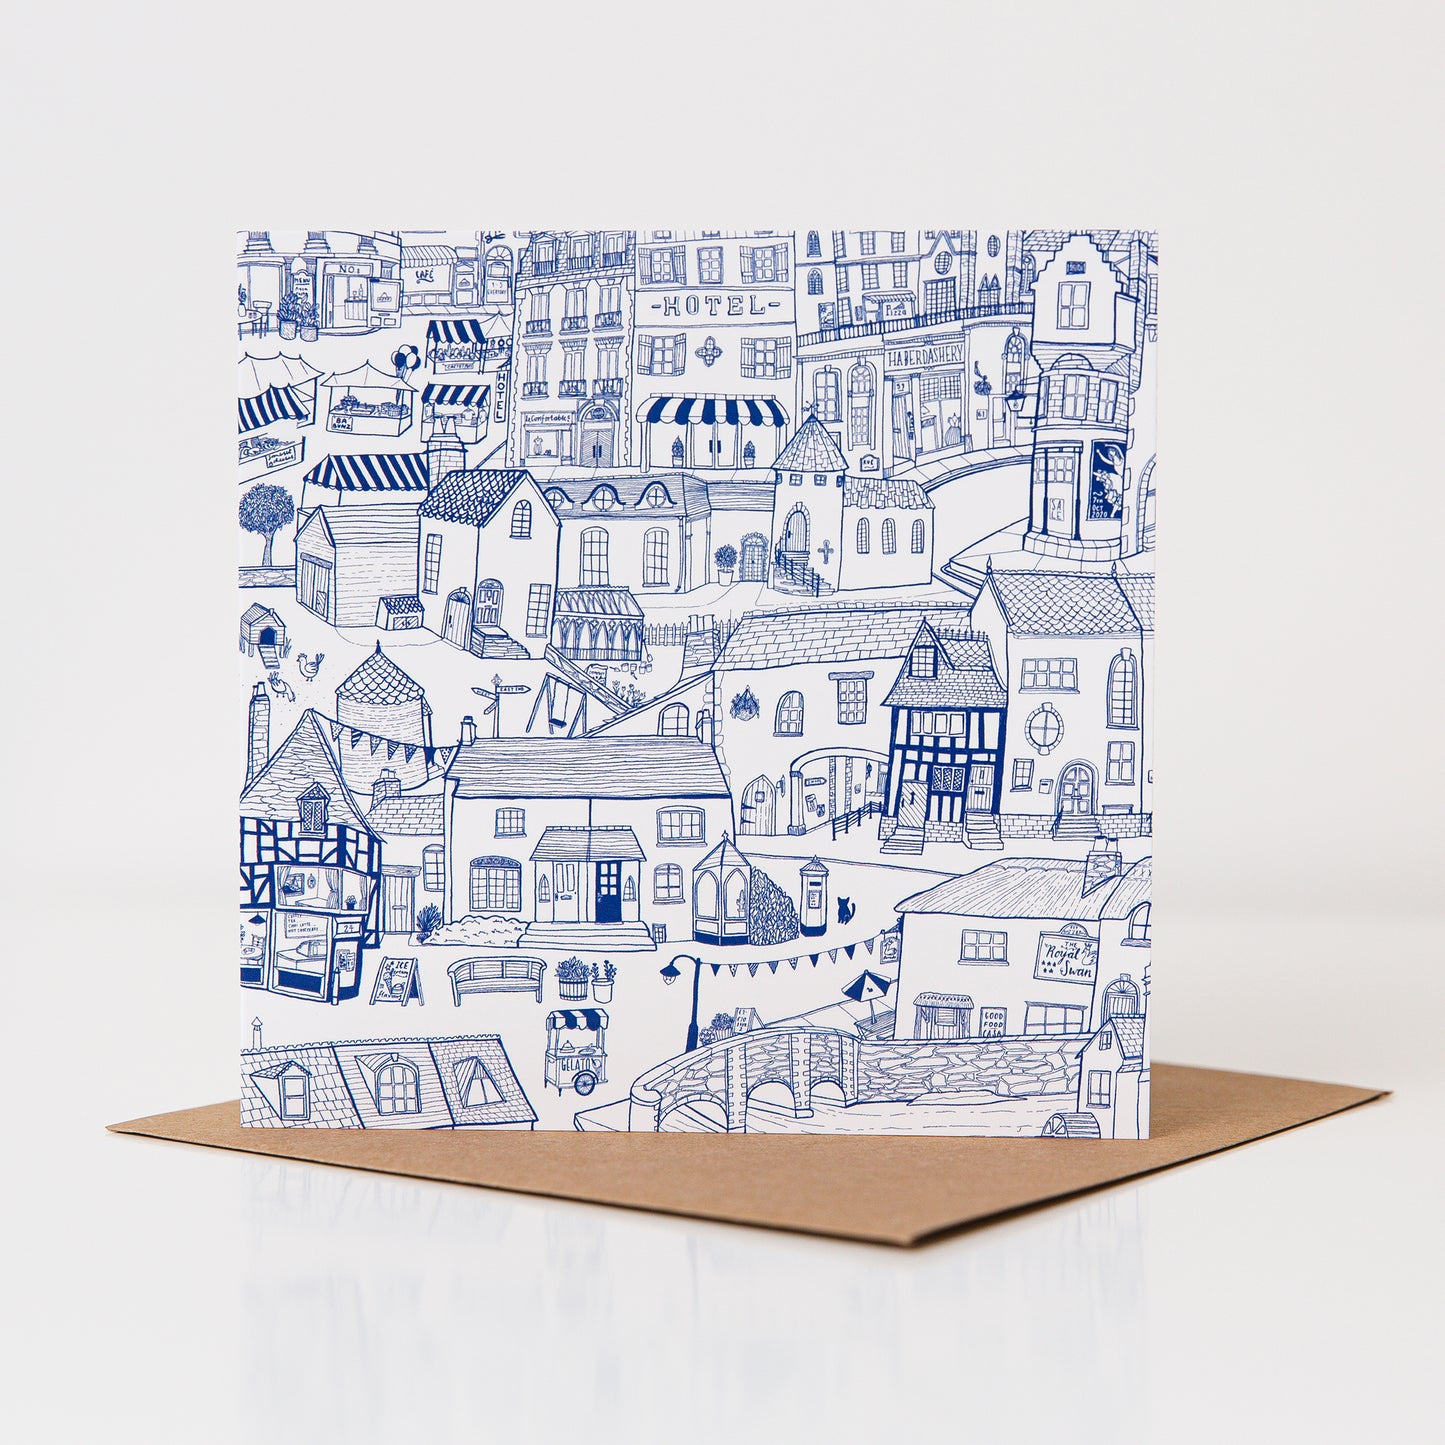 "This charming blue town" Greetings Card